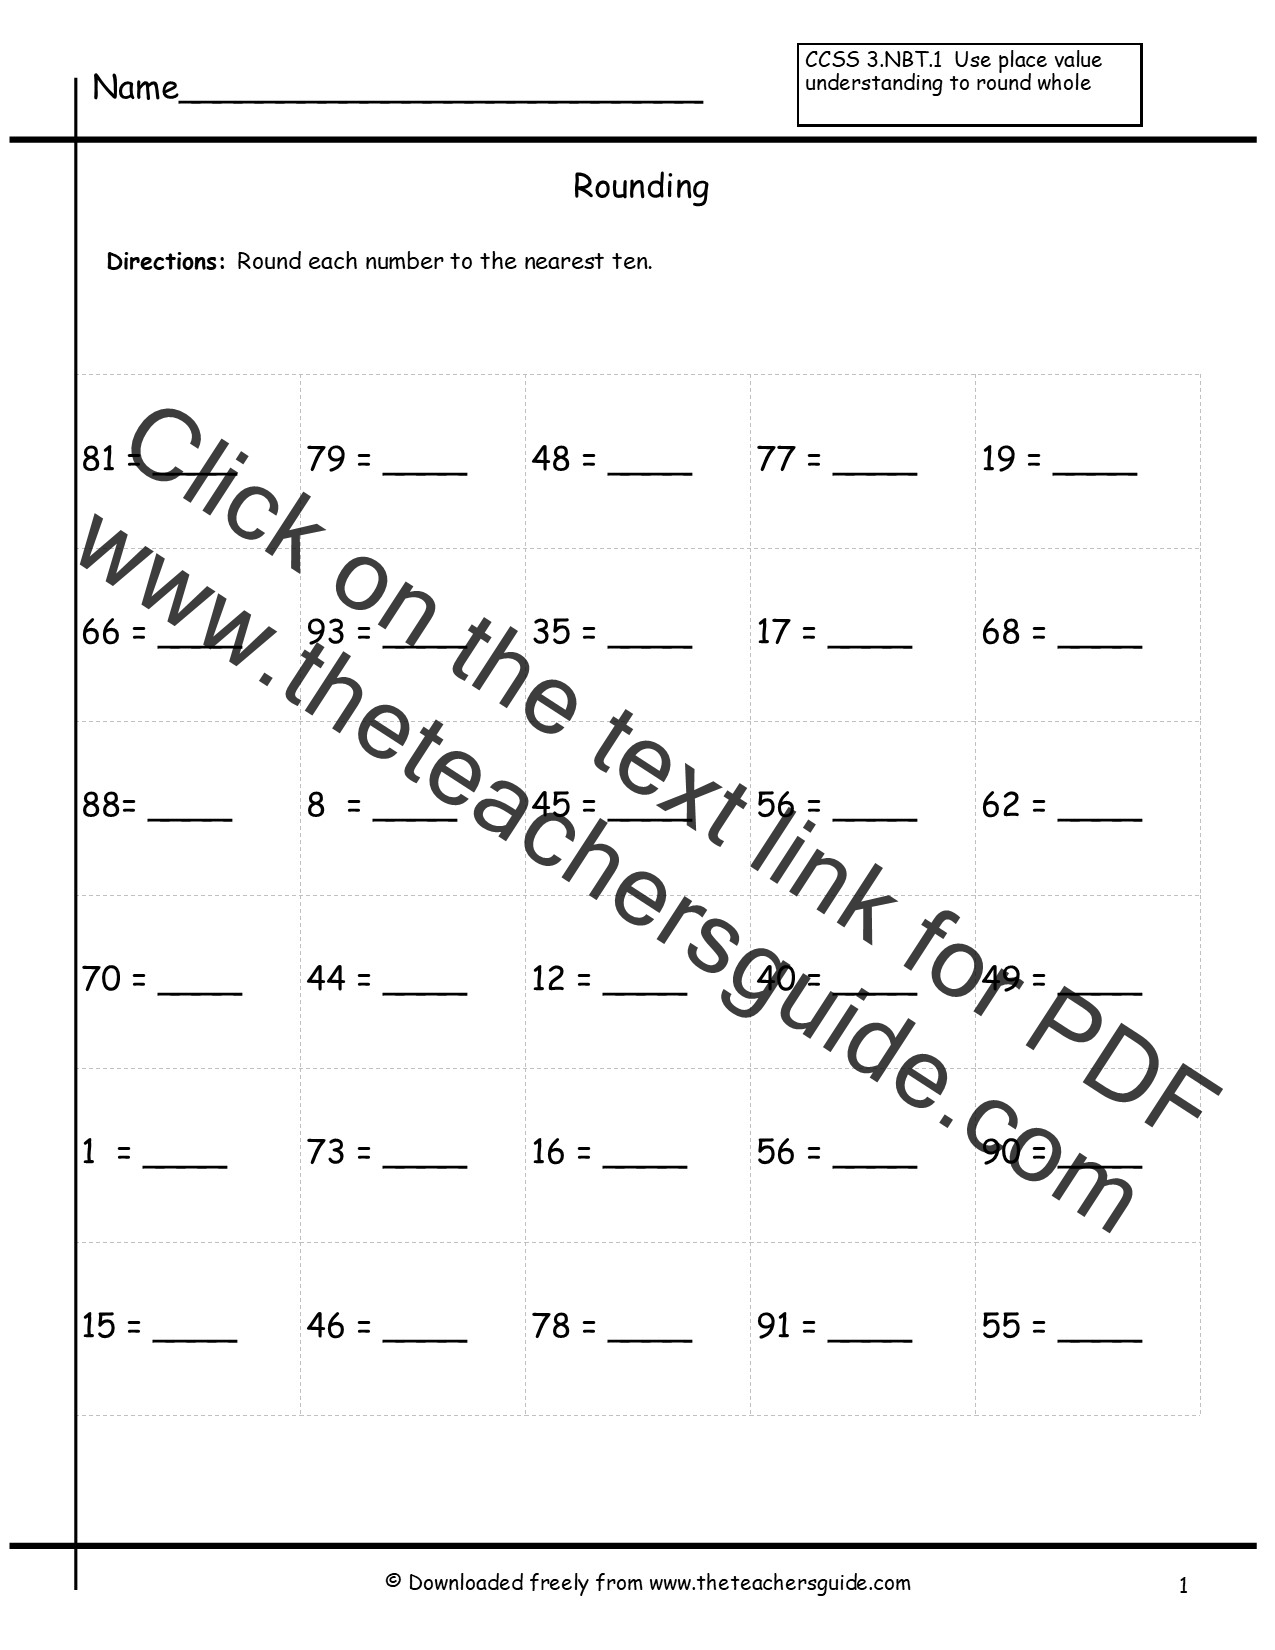 rounding-to-the-nearest-100-worksheets